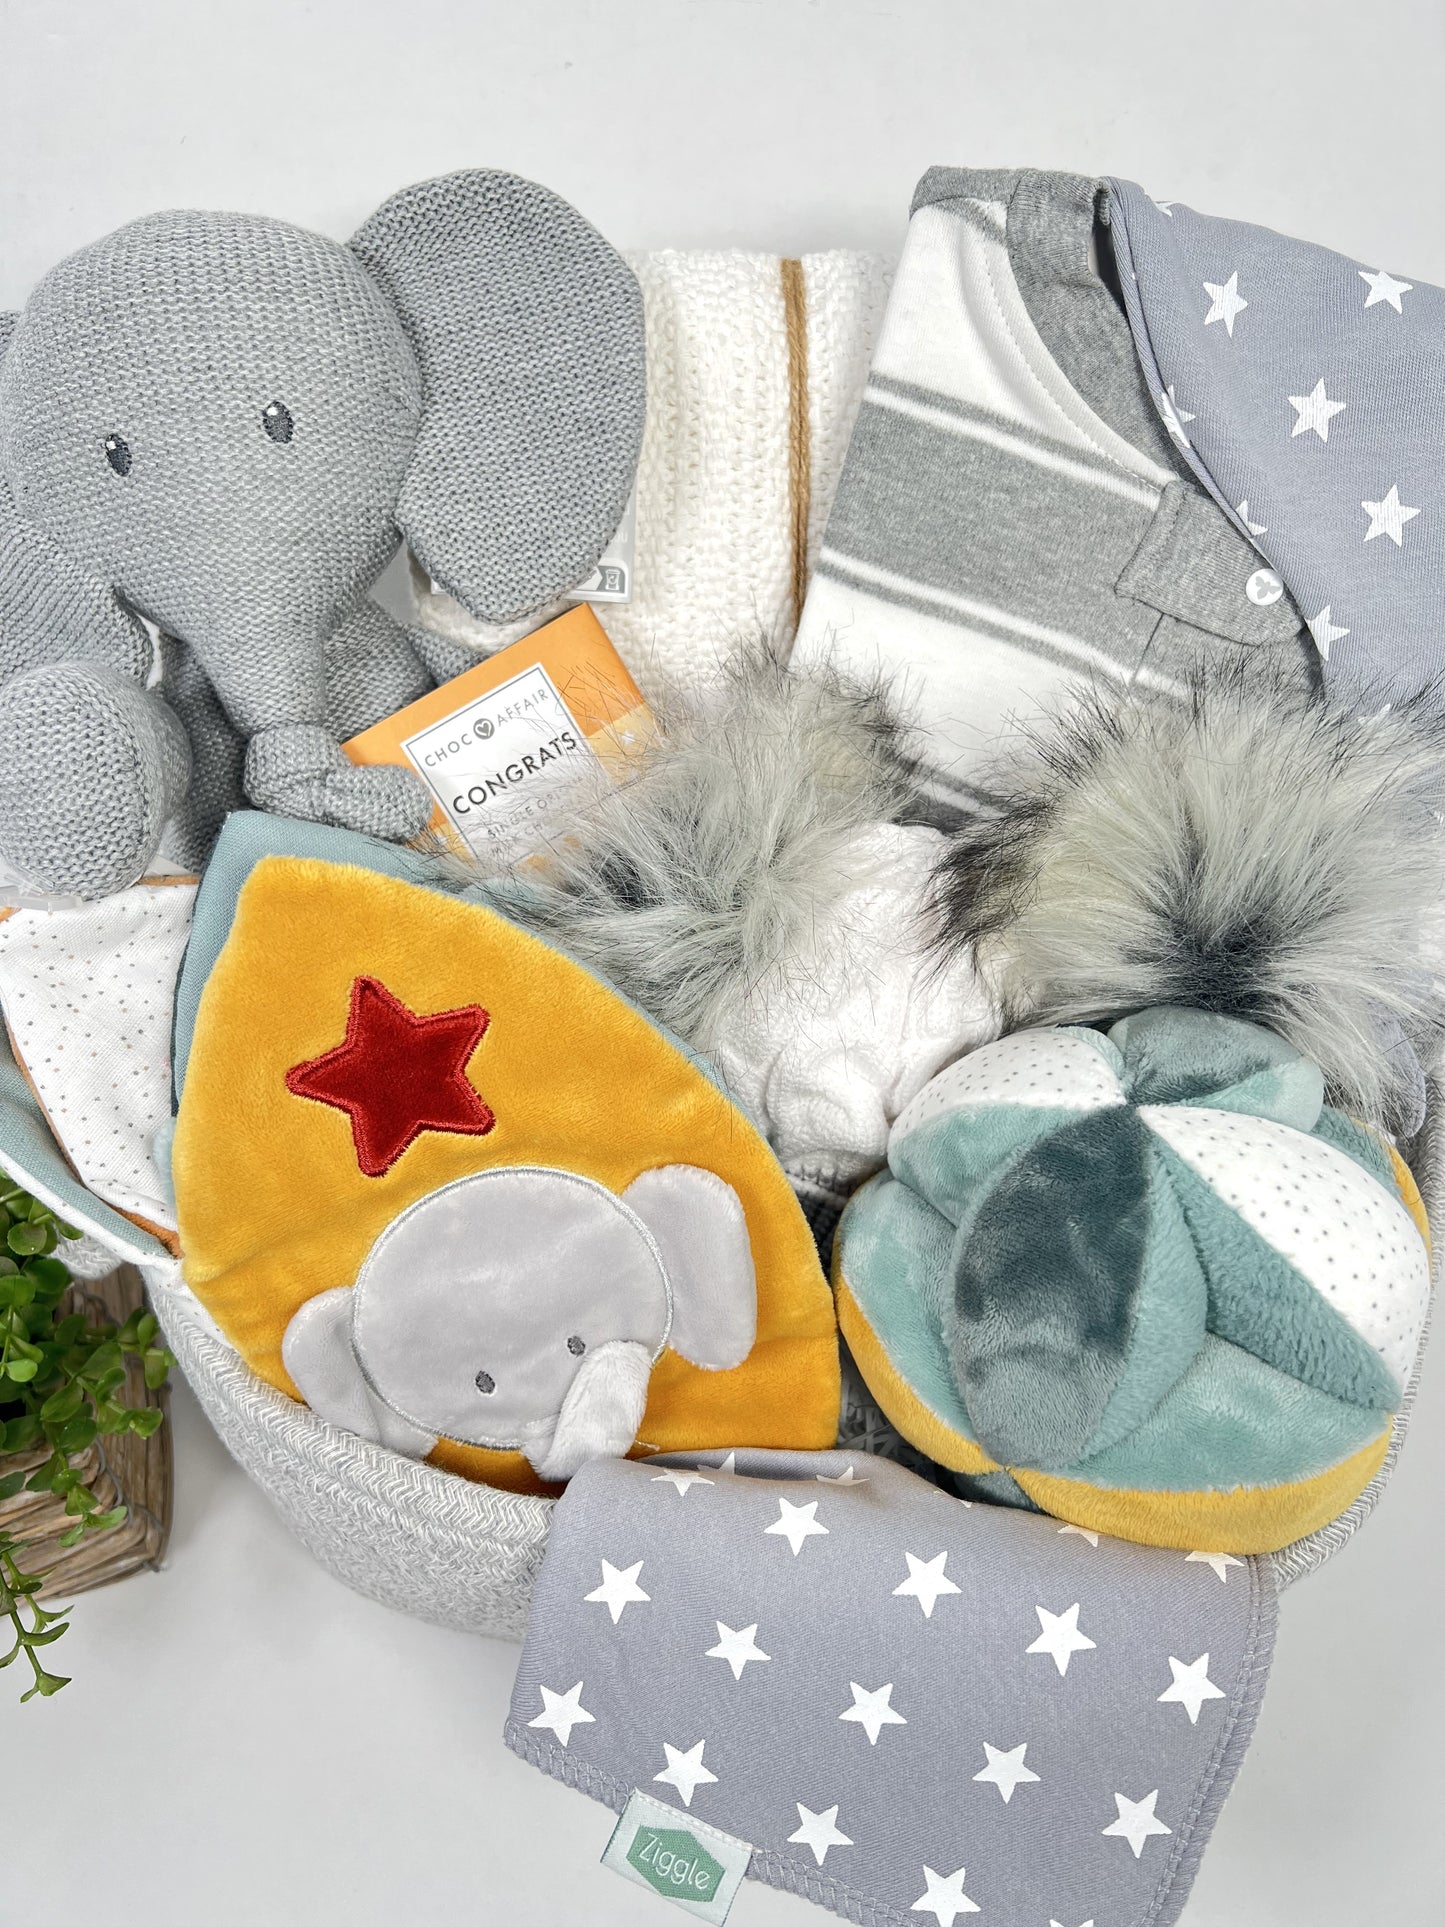 Tembo Elephant Luxury Unisex Baby Hamper Nappy Caddy Gift, Corporate  New baby Gifts, Tembo Elephant Soft Toy, Axel And Luna Sensory Baby Book